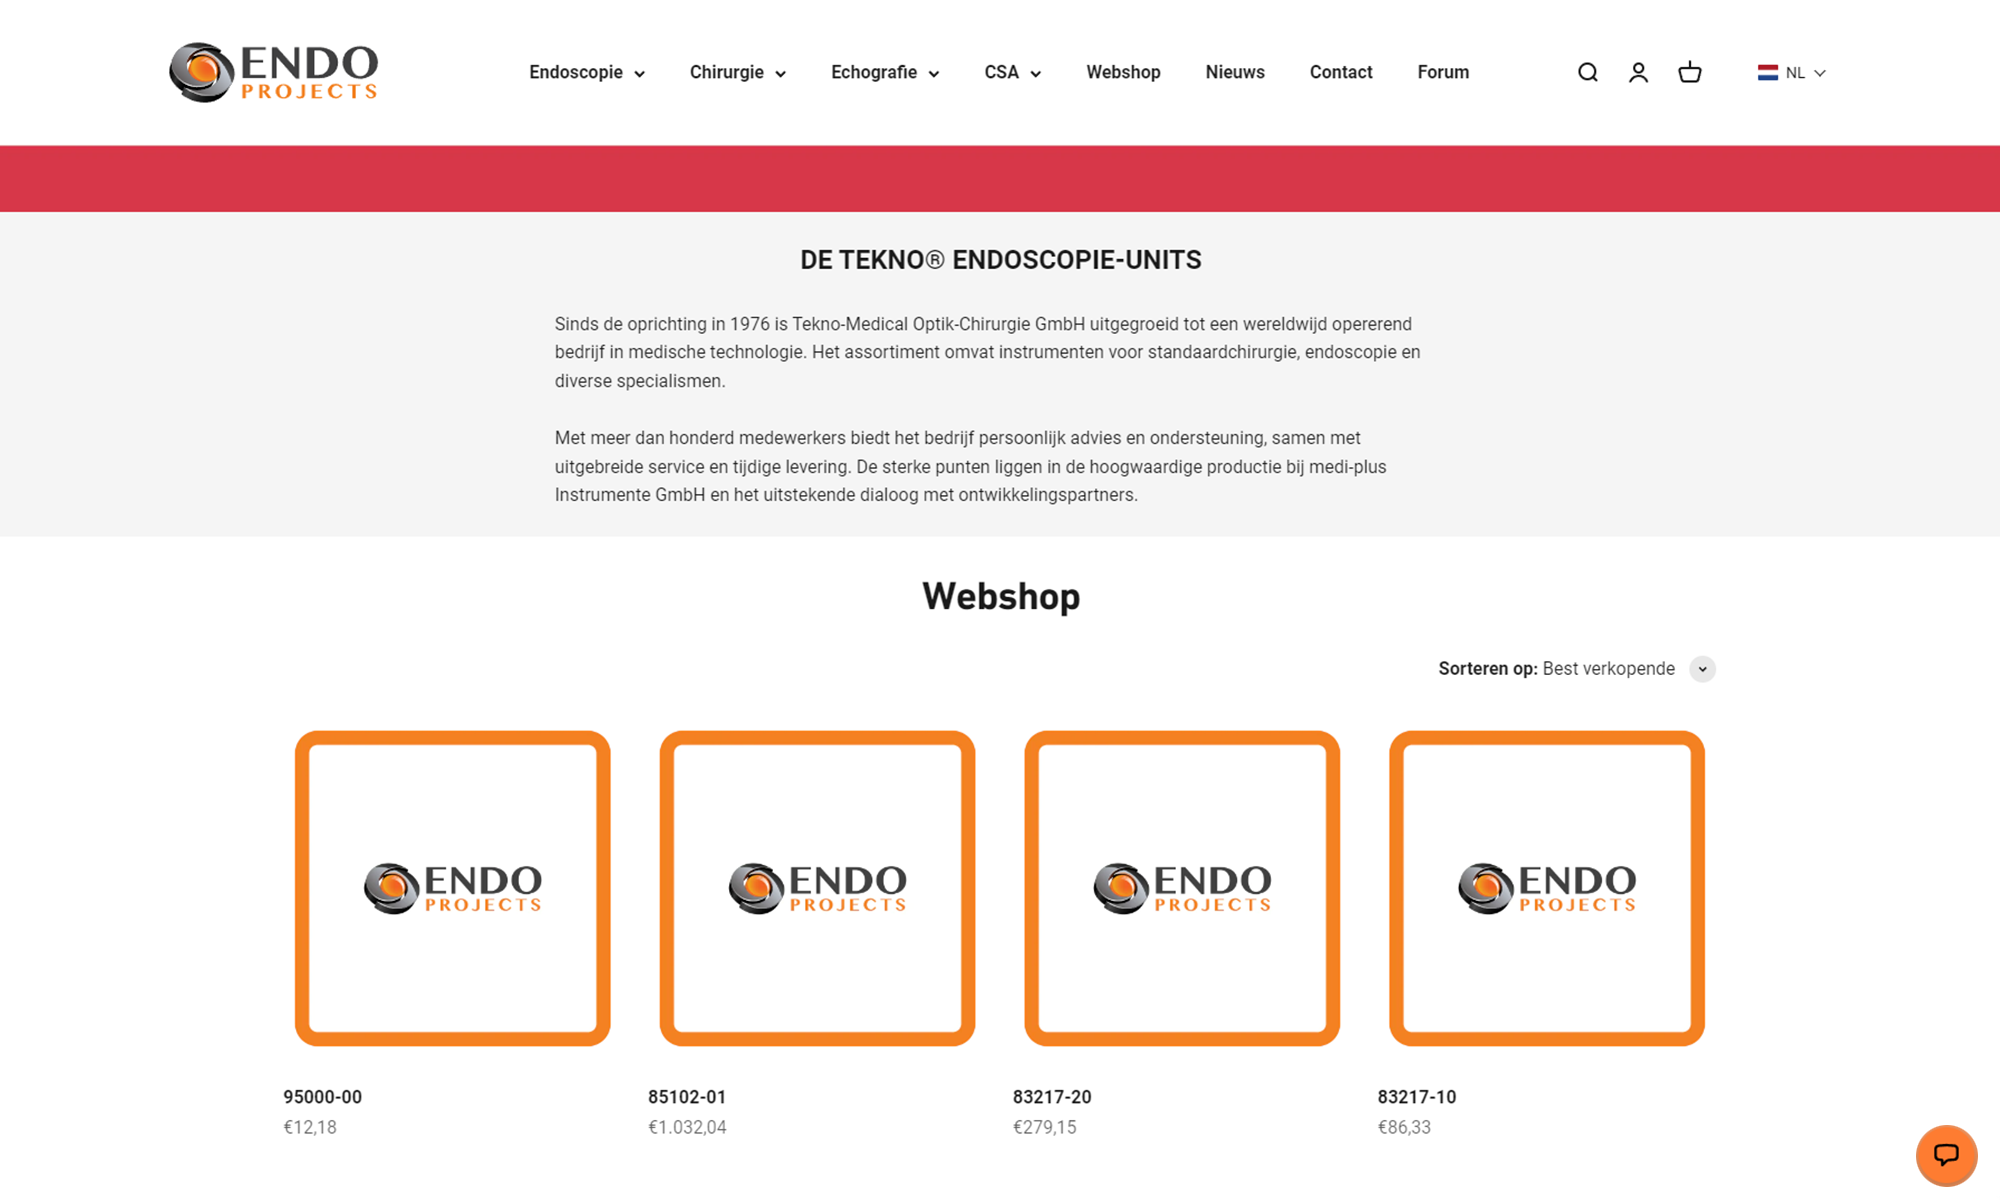 Endo projects webshop all permissions